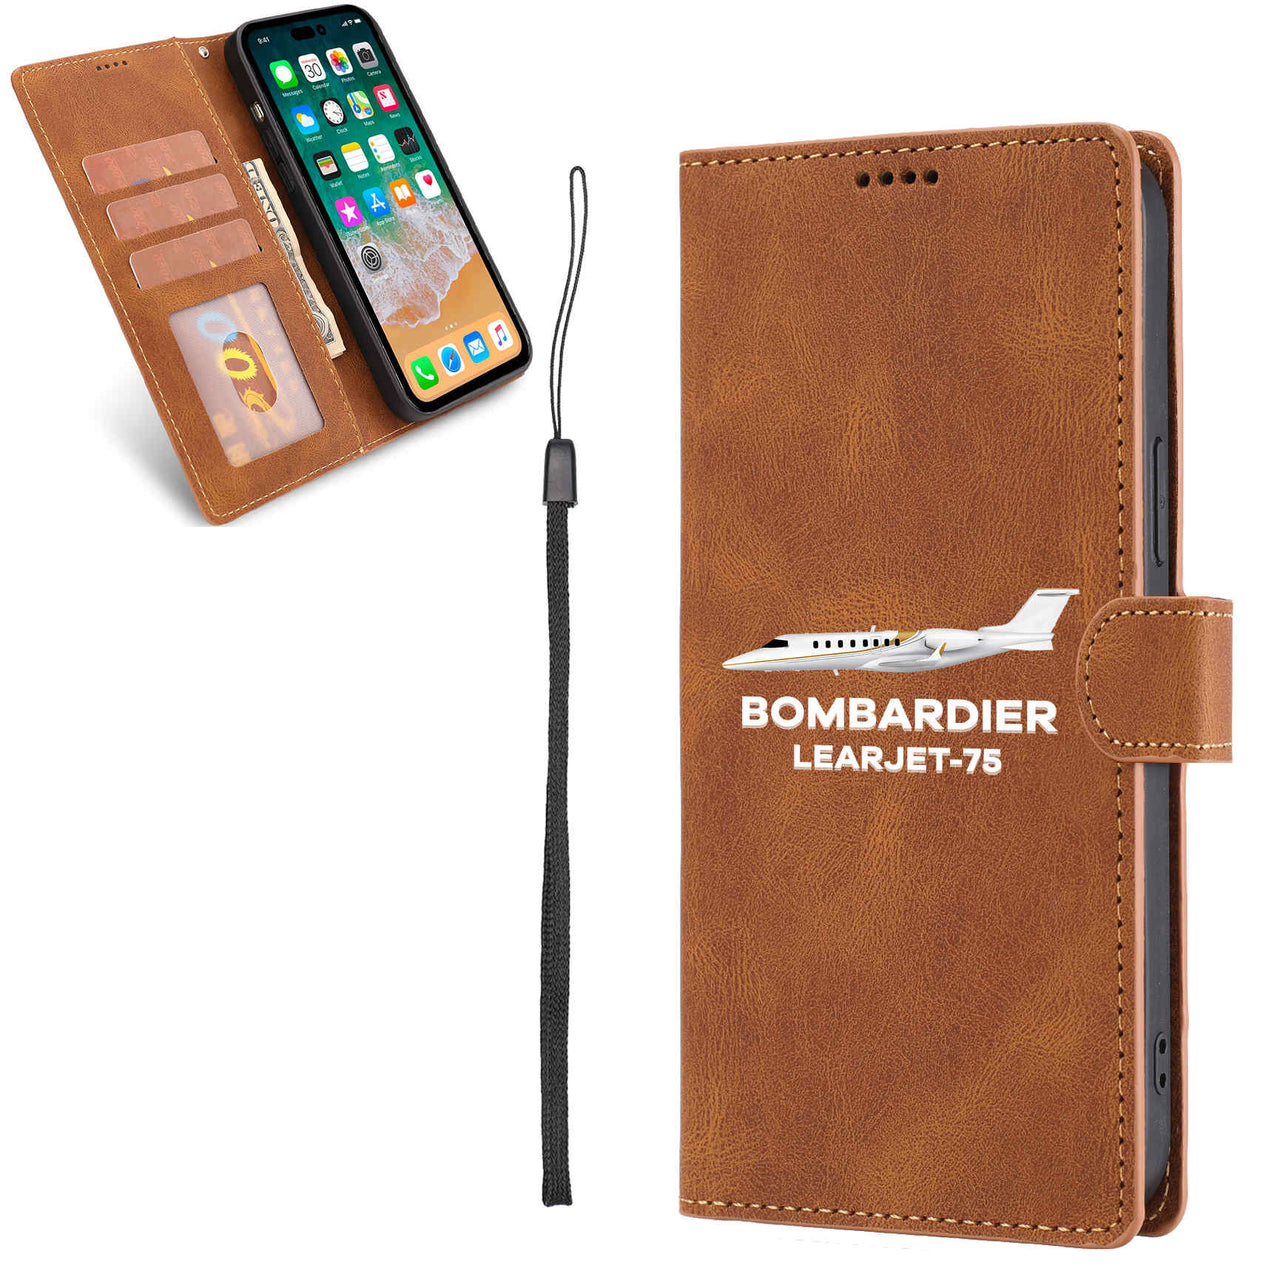 The Bombardier Learjet 75 Designed Leather Samsung S & Note Cases